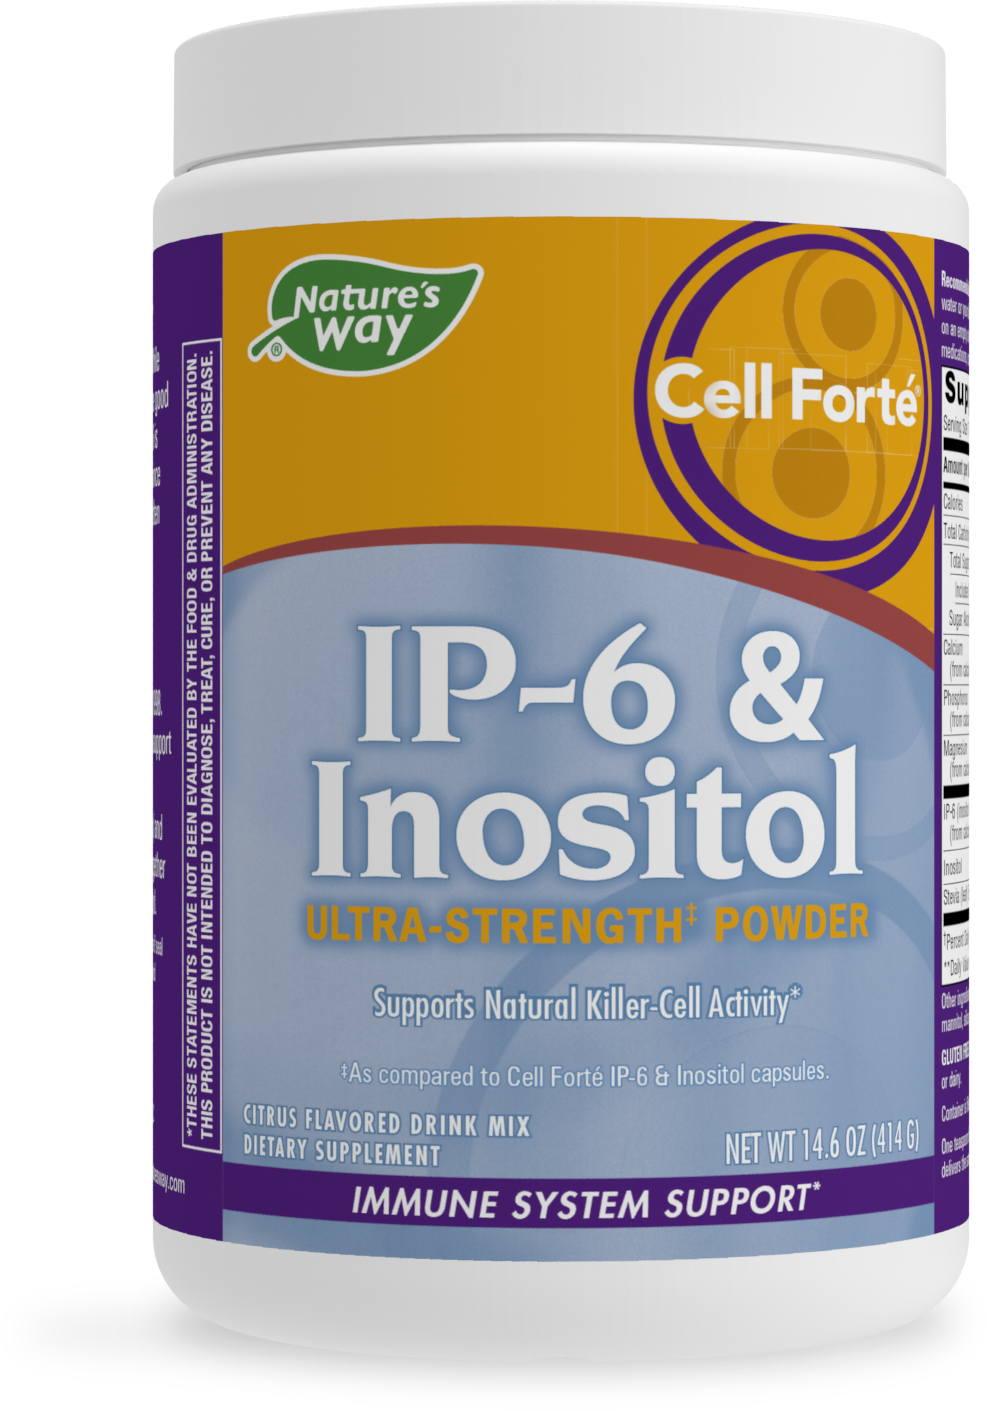 Cell Forté® IP-6 & Inositol Powder